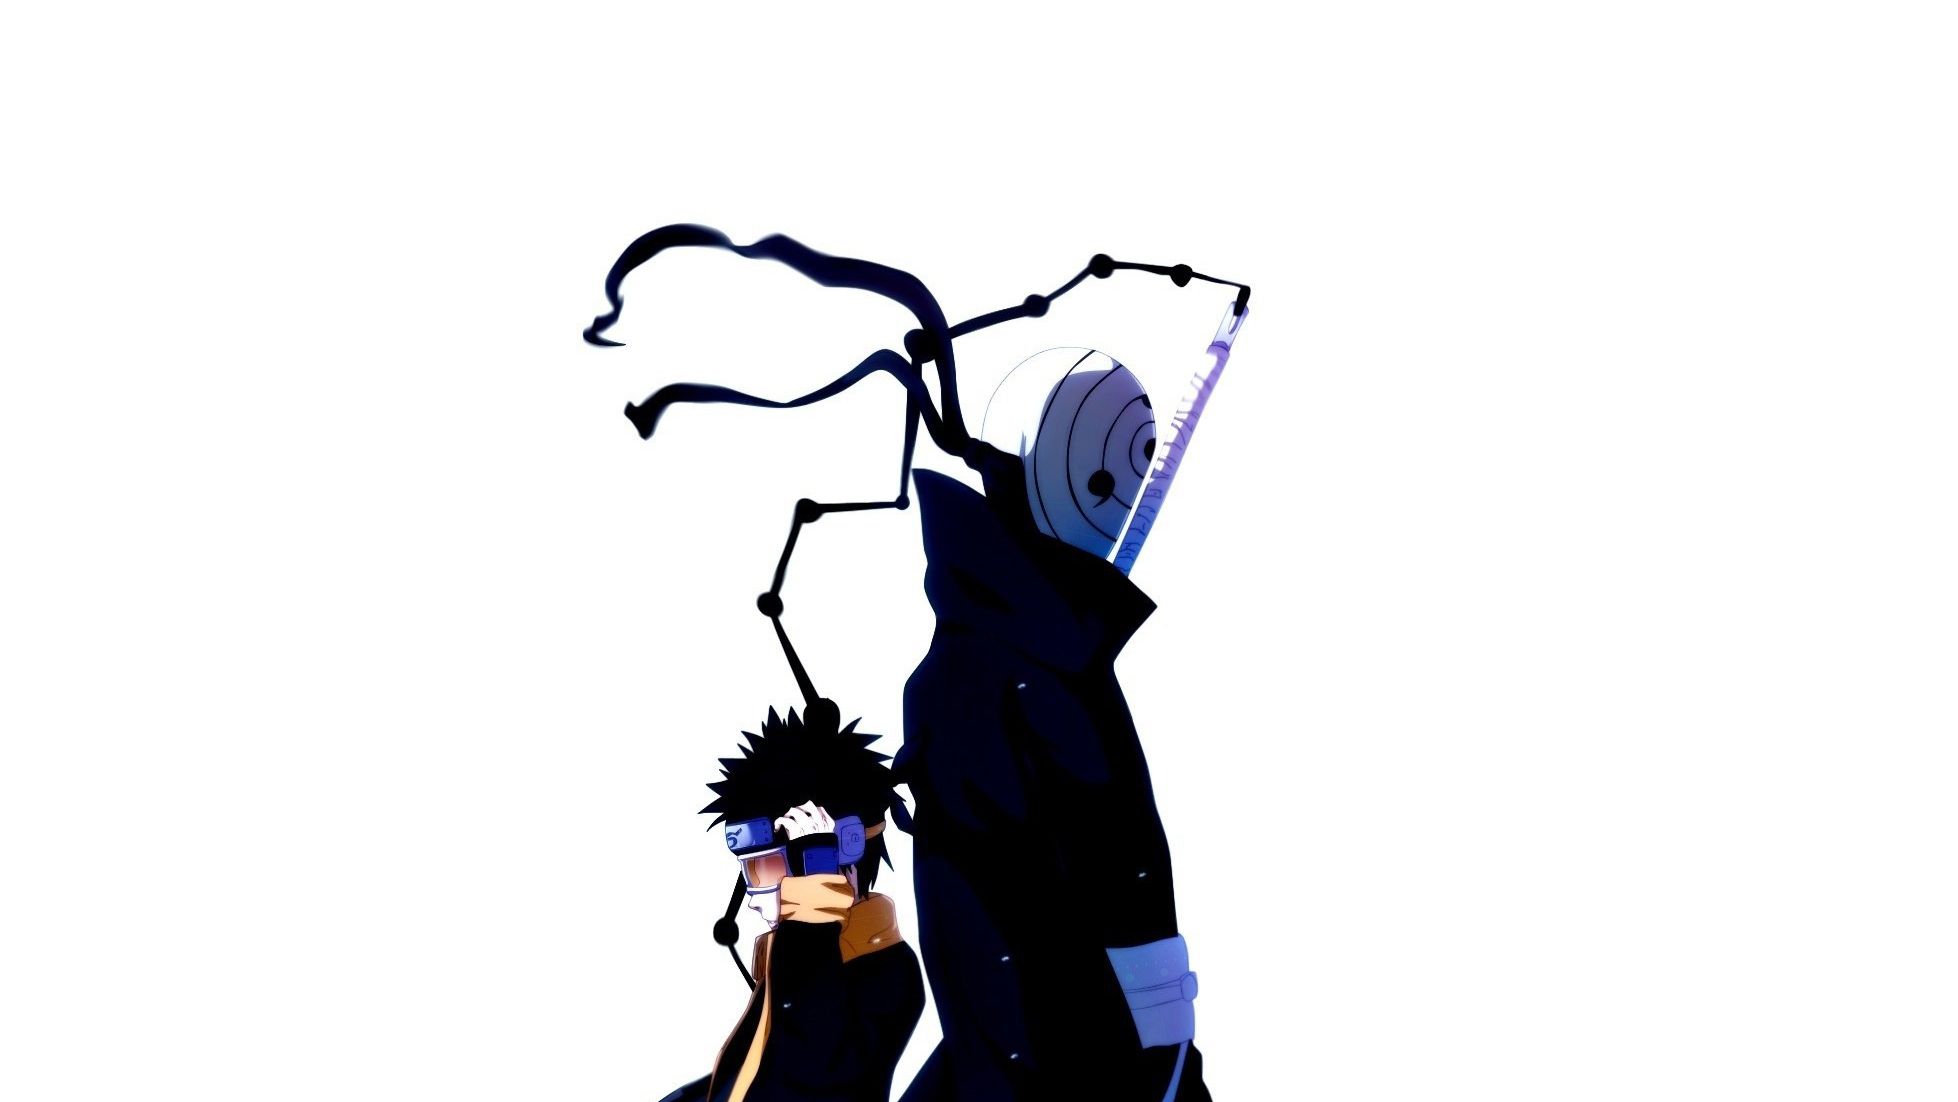 Obito PC Wallpapers - Wallpaper Cave